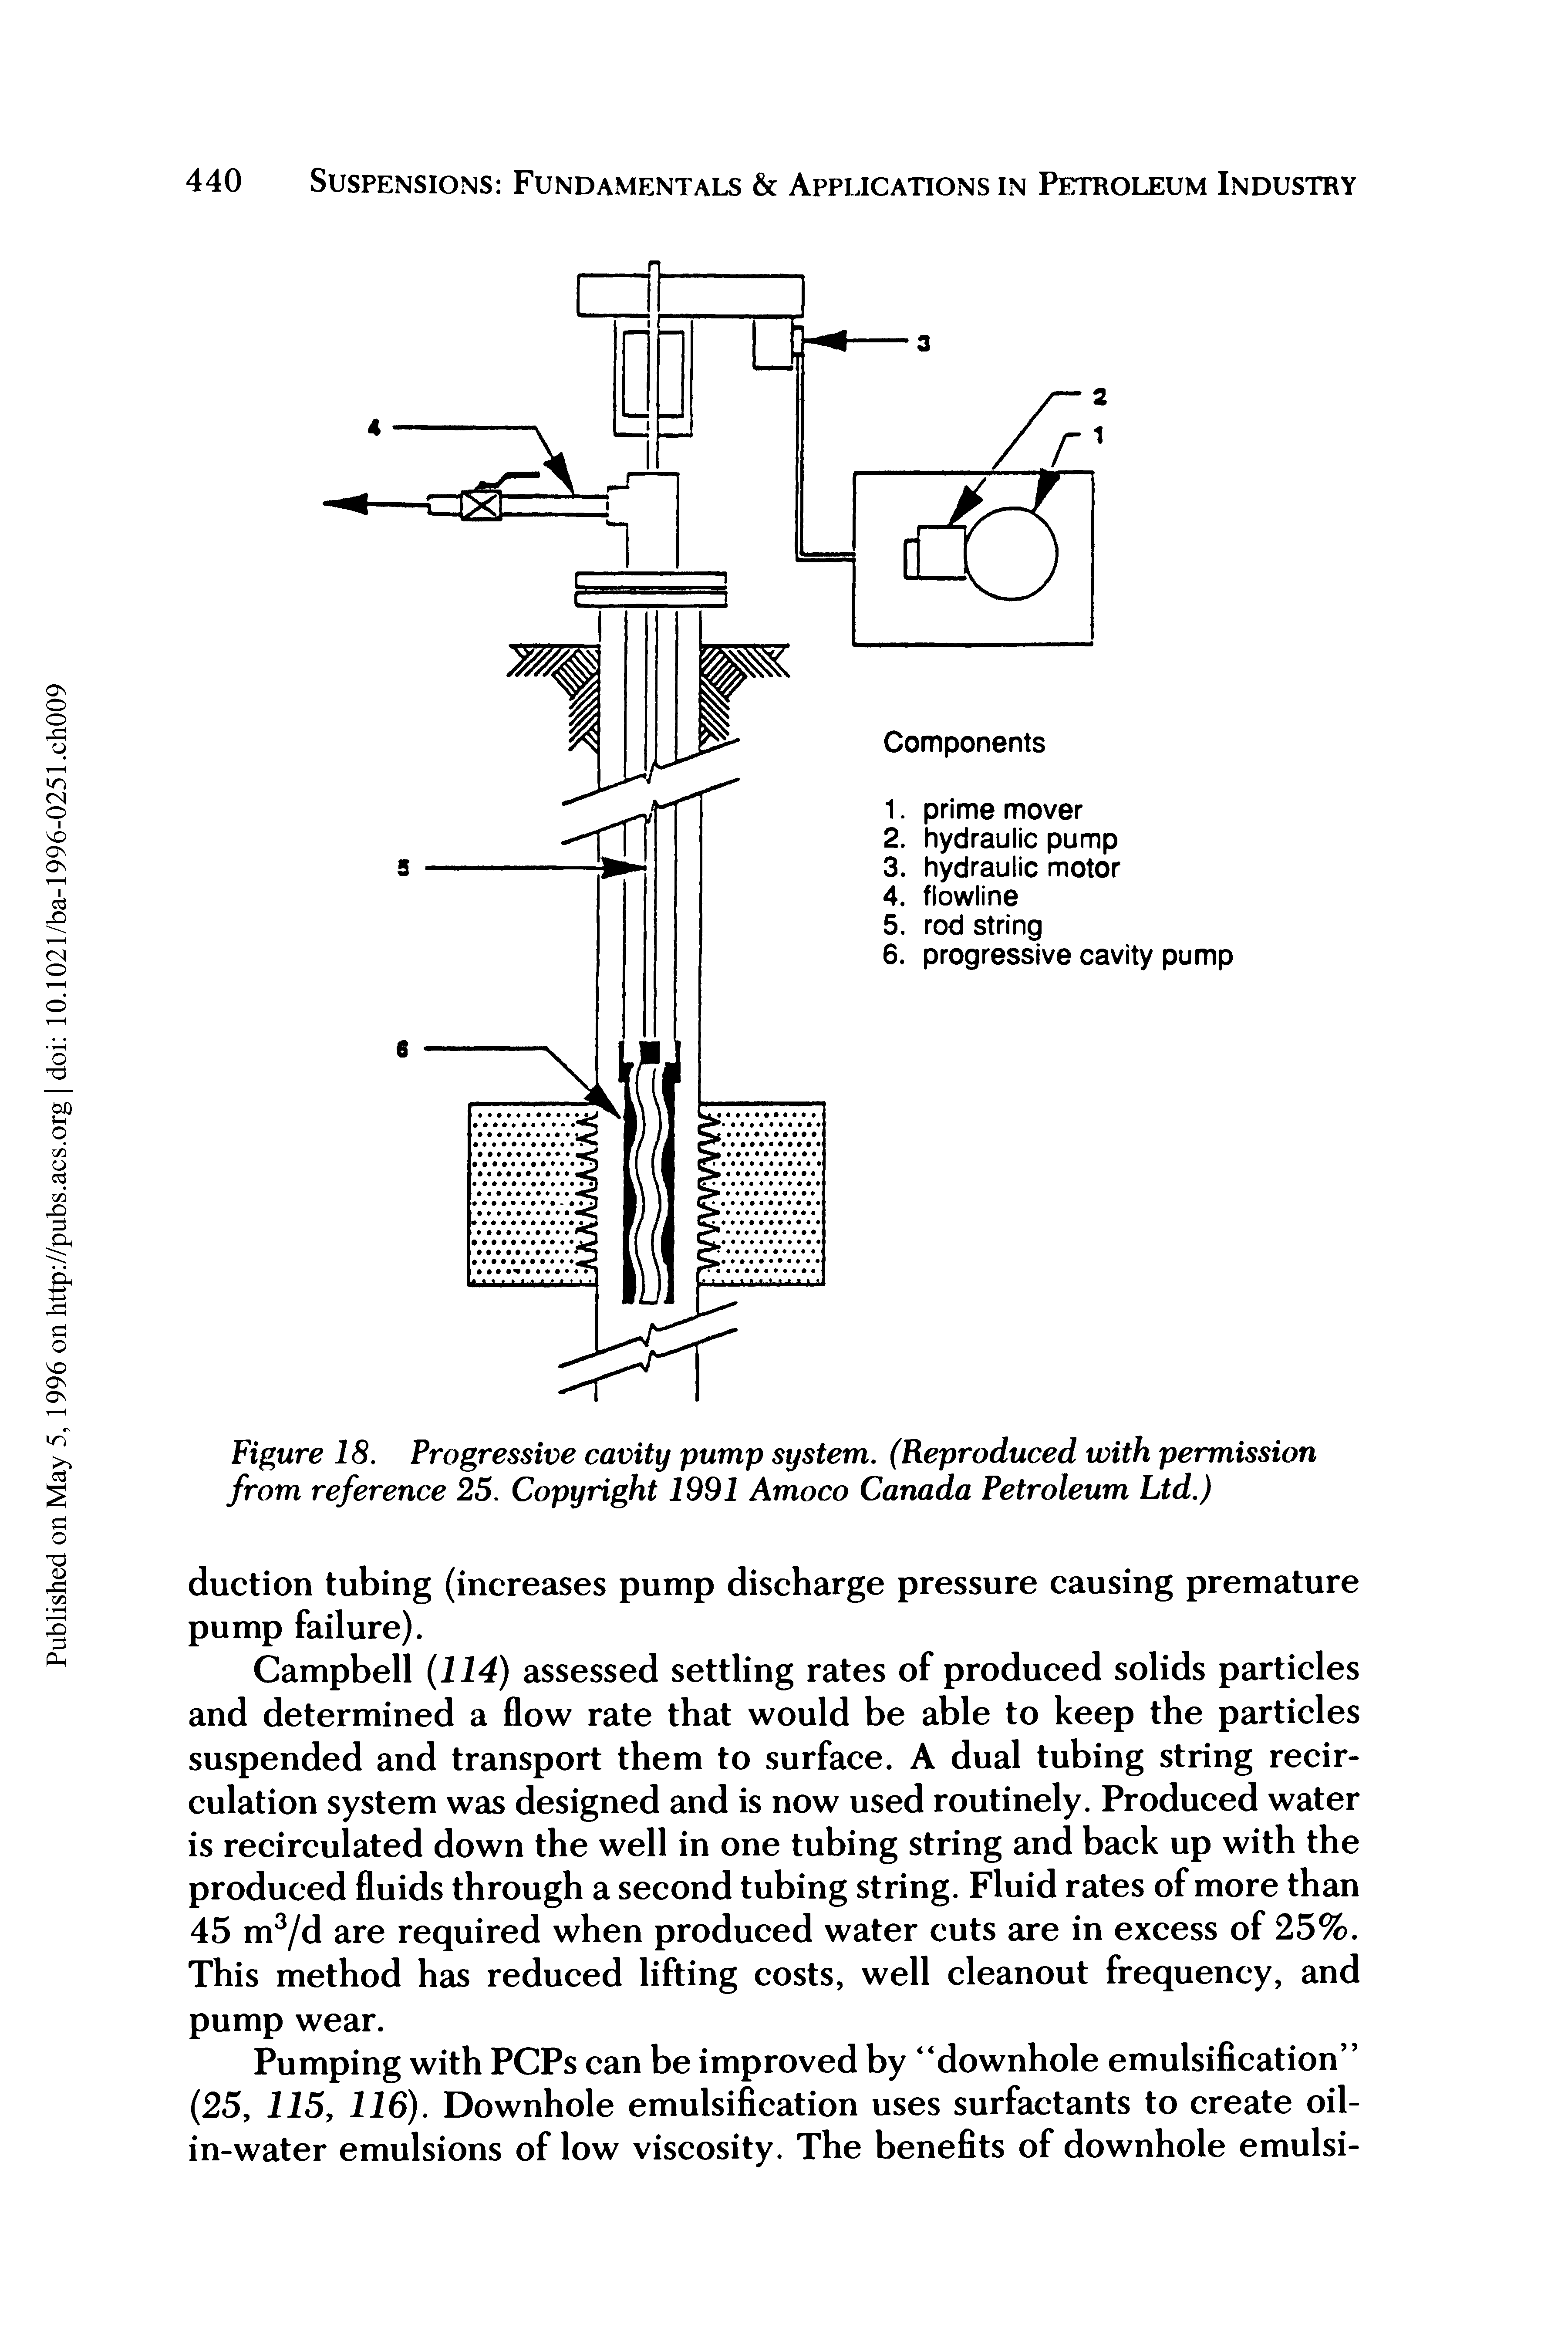 Figure 18. Progressive cavity pump system. (Reproduced with permission from reference 25. Copyright 1991 Amoco Canada Petroleum Ltd.)...